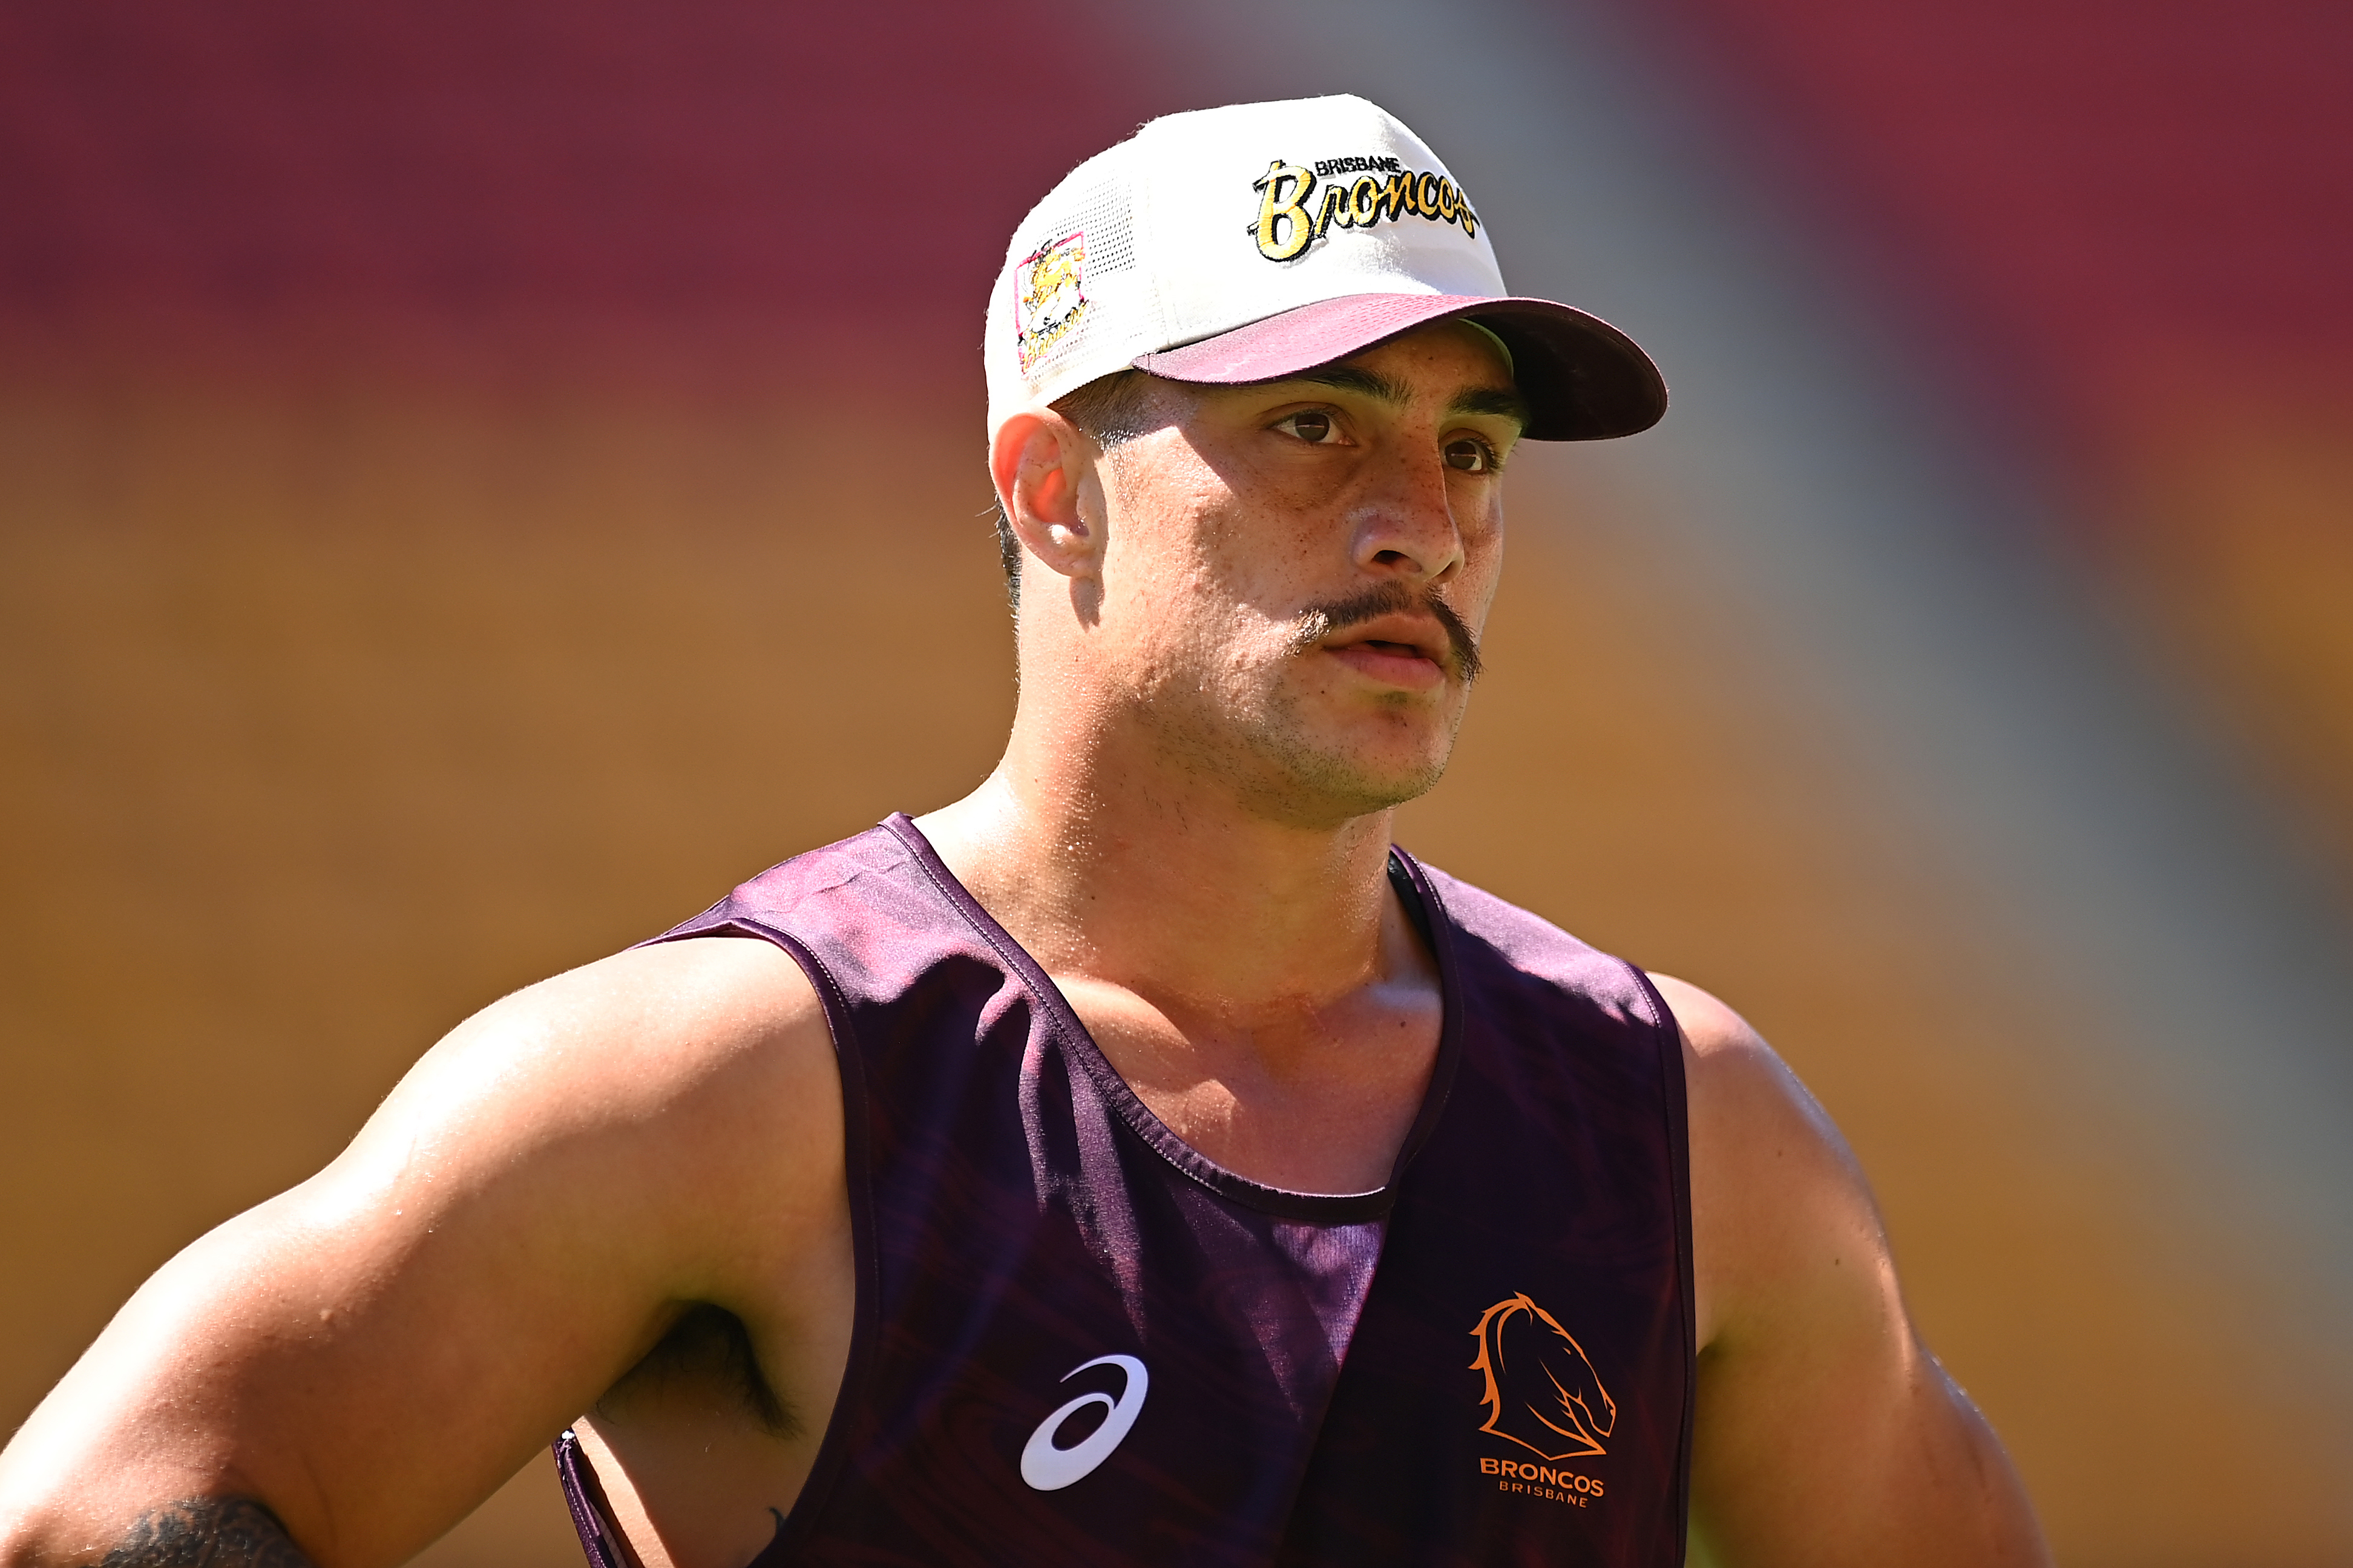 haas 'in trouble' as training run exposes broncos injuries